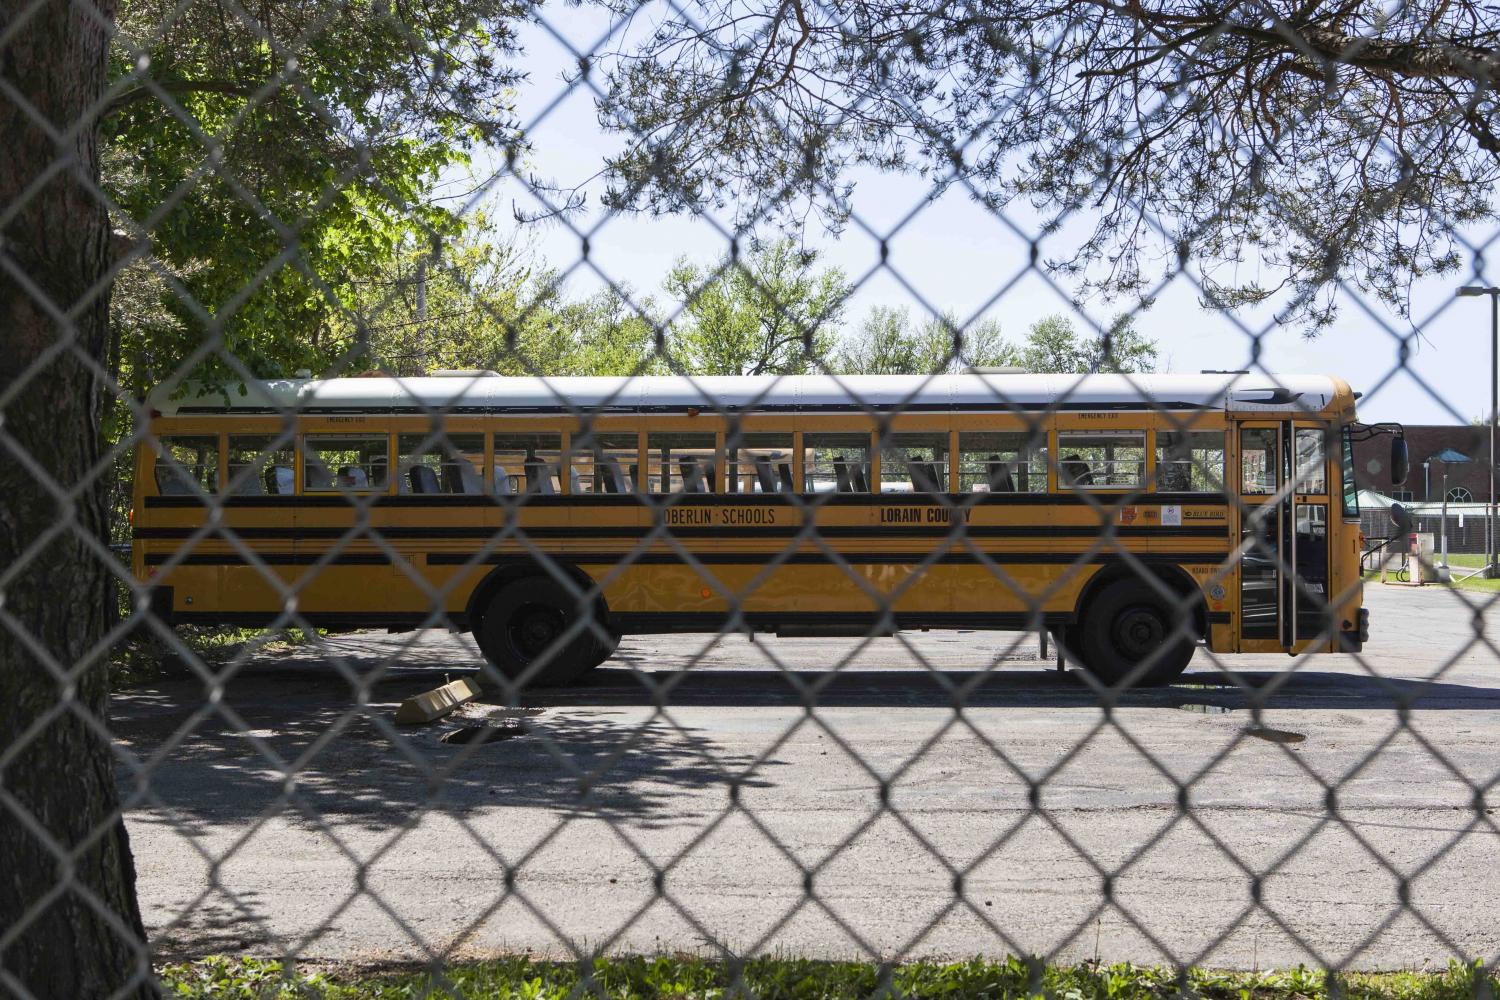 A+bus+parked+outside+of+Langston+Middle+School.+Local+school+parents+accused+the+Oberlin+School+Board+of+spending+an+estimated+excess+of+%241+million+on+school+bus+repairs+over+the+past+10+years.